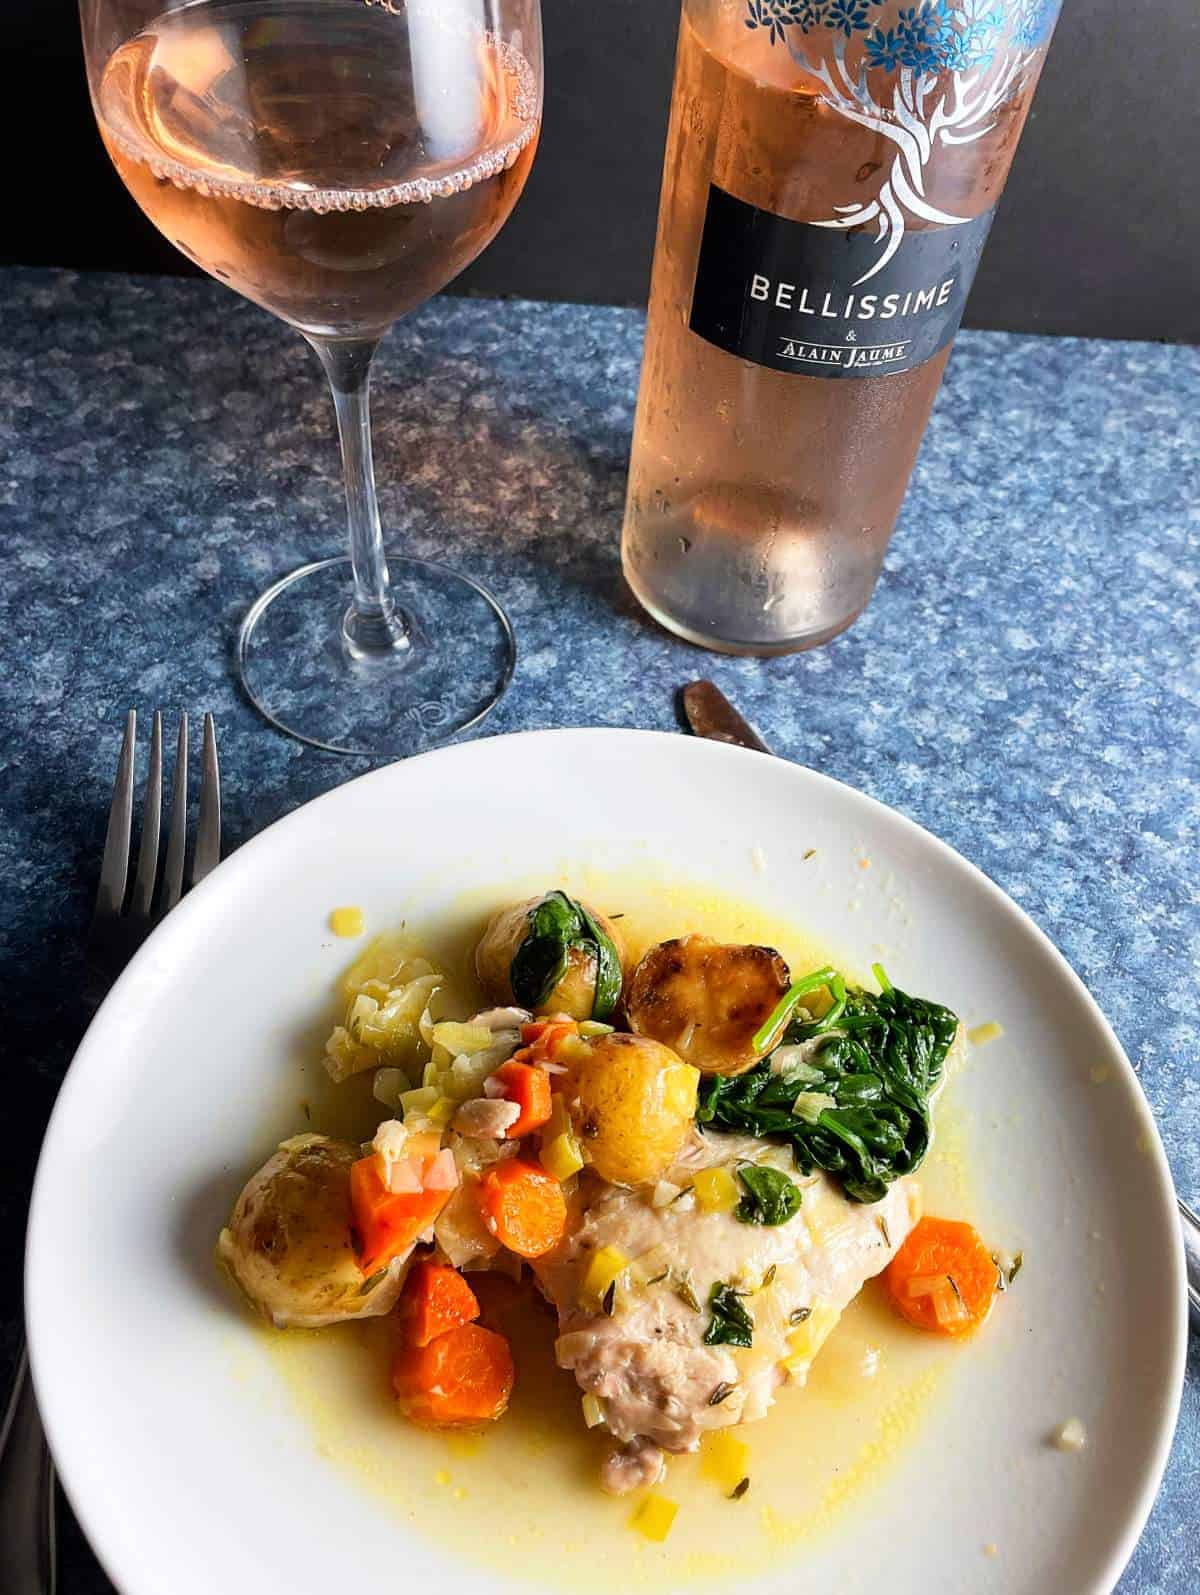 boneless chicken thighs served with vegetables and a rosé wine.